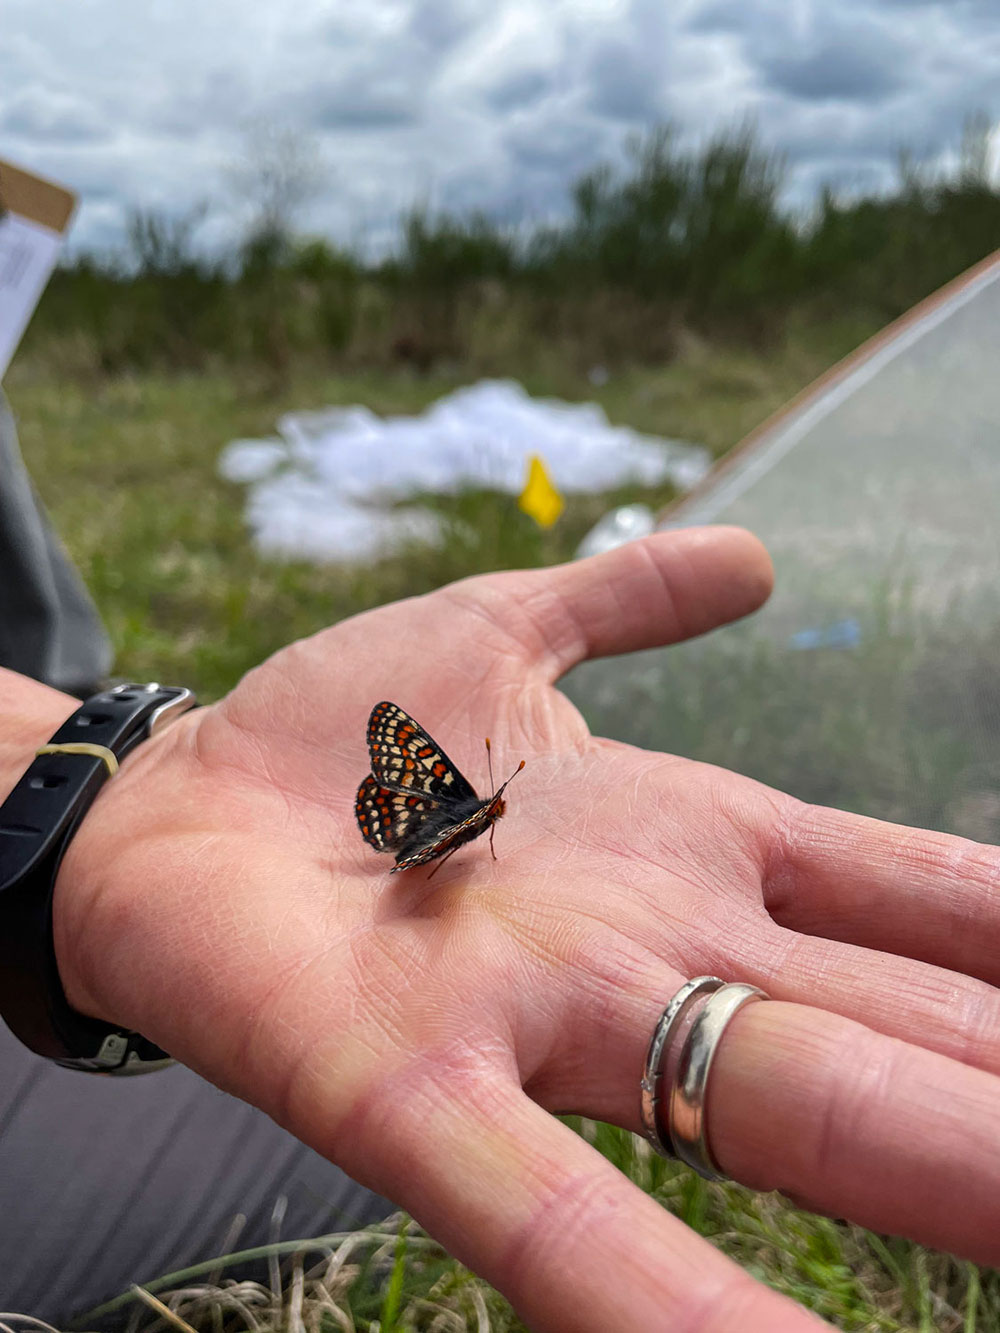 A black, orange and white butterfly alights on an outstretched palm. The palm is pale and the person is wearing two stacked rings on their ring finger.